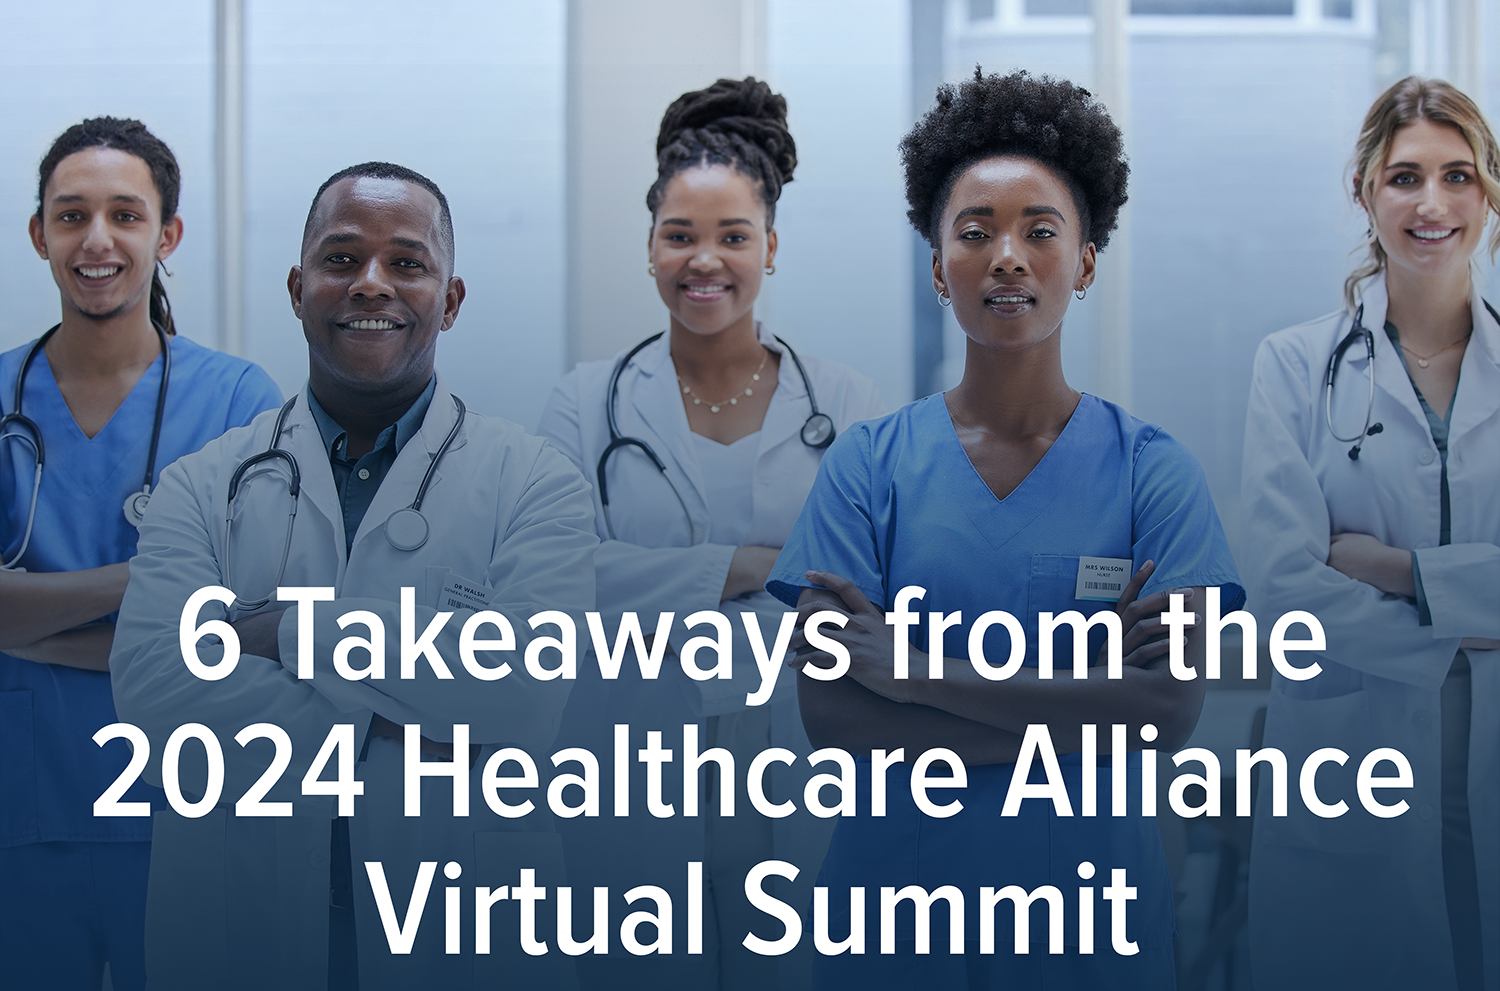 Clinicians posed in a row with the title: 6 Takeaways from the 2024 Healthcare Alliance Virtual Summit